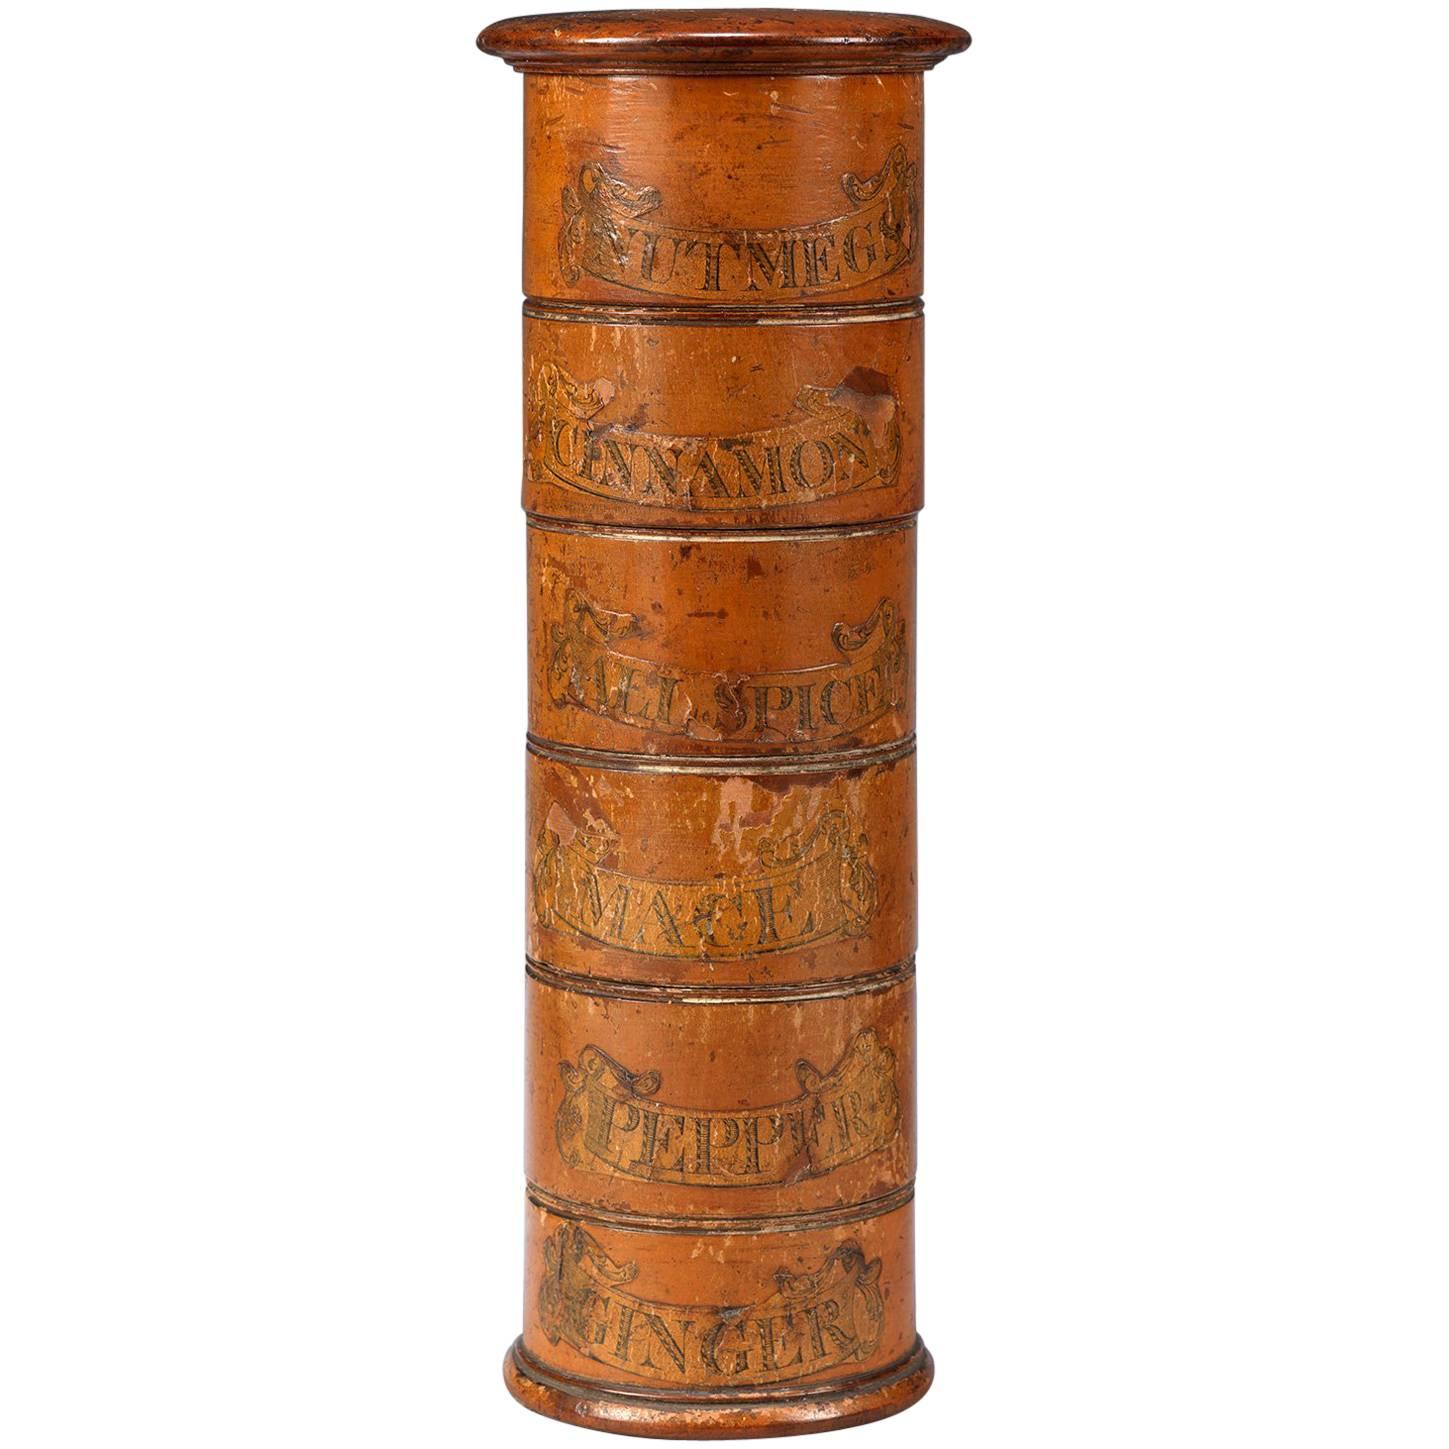 Rare Tall Six Section Spice Tower